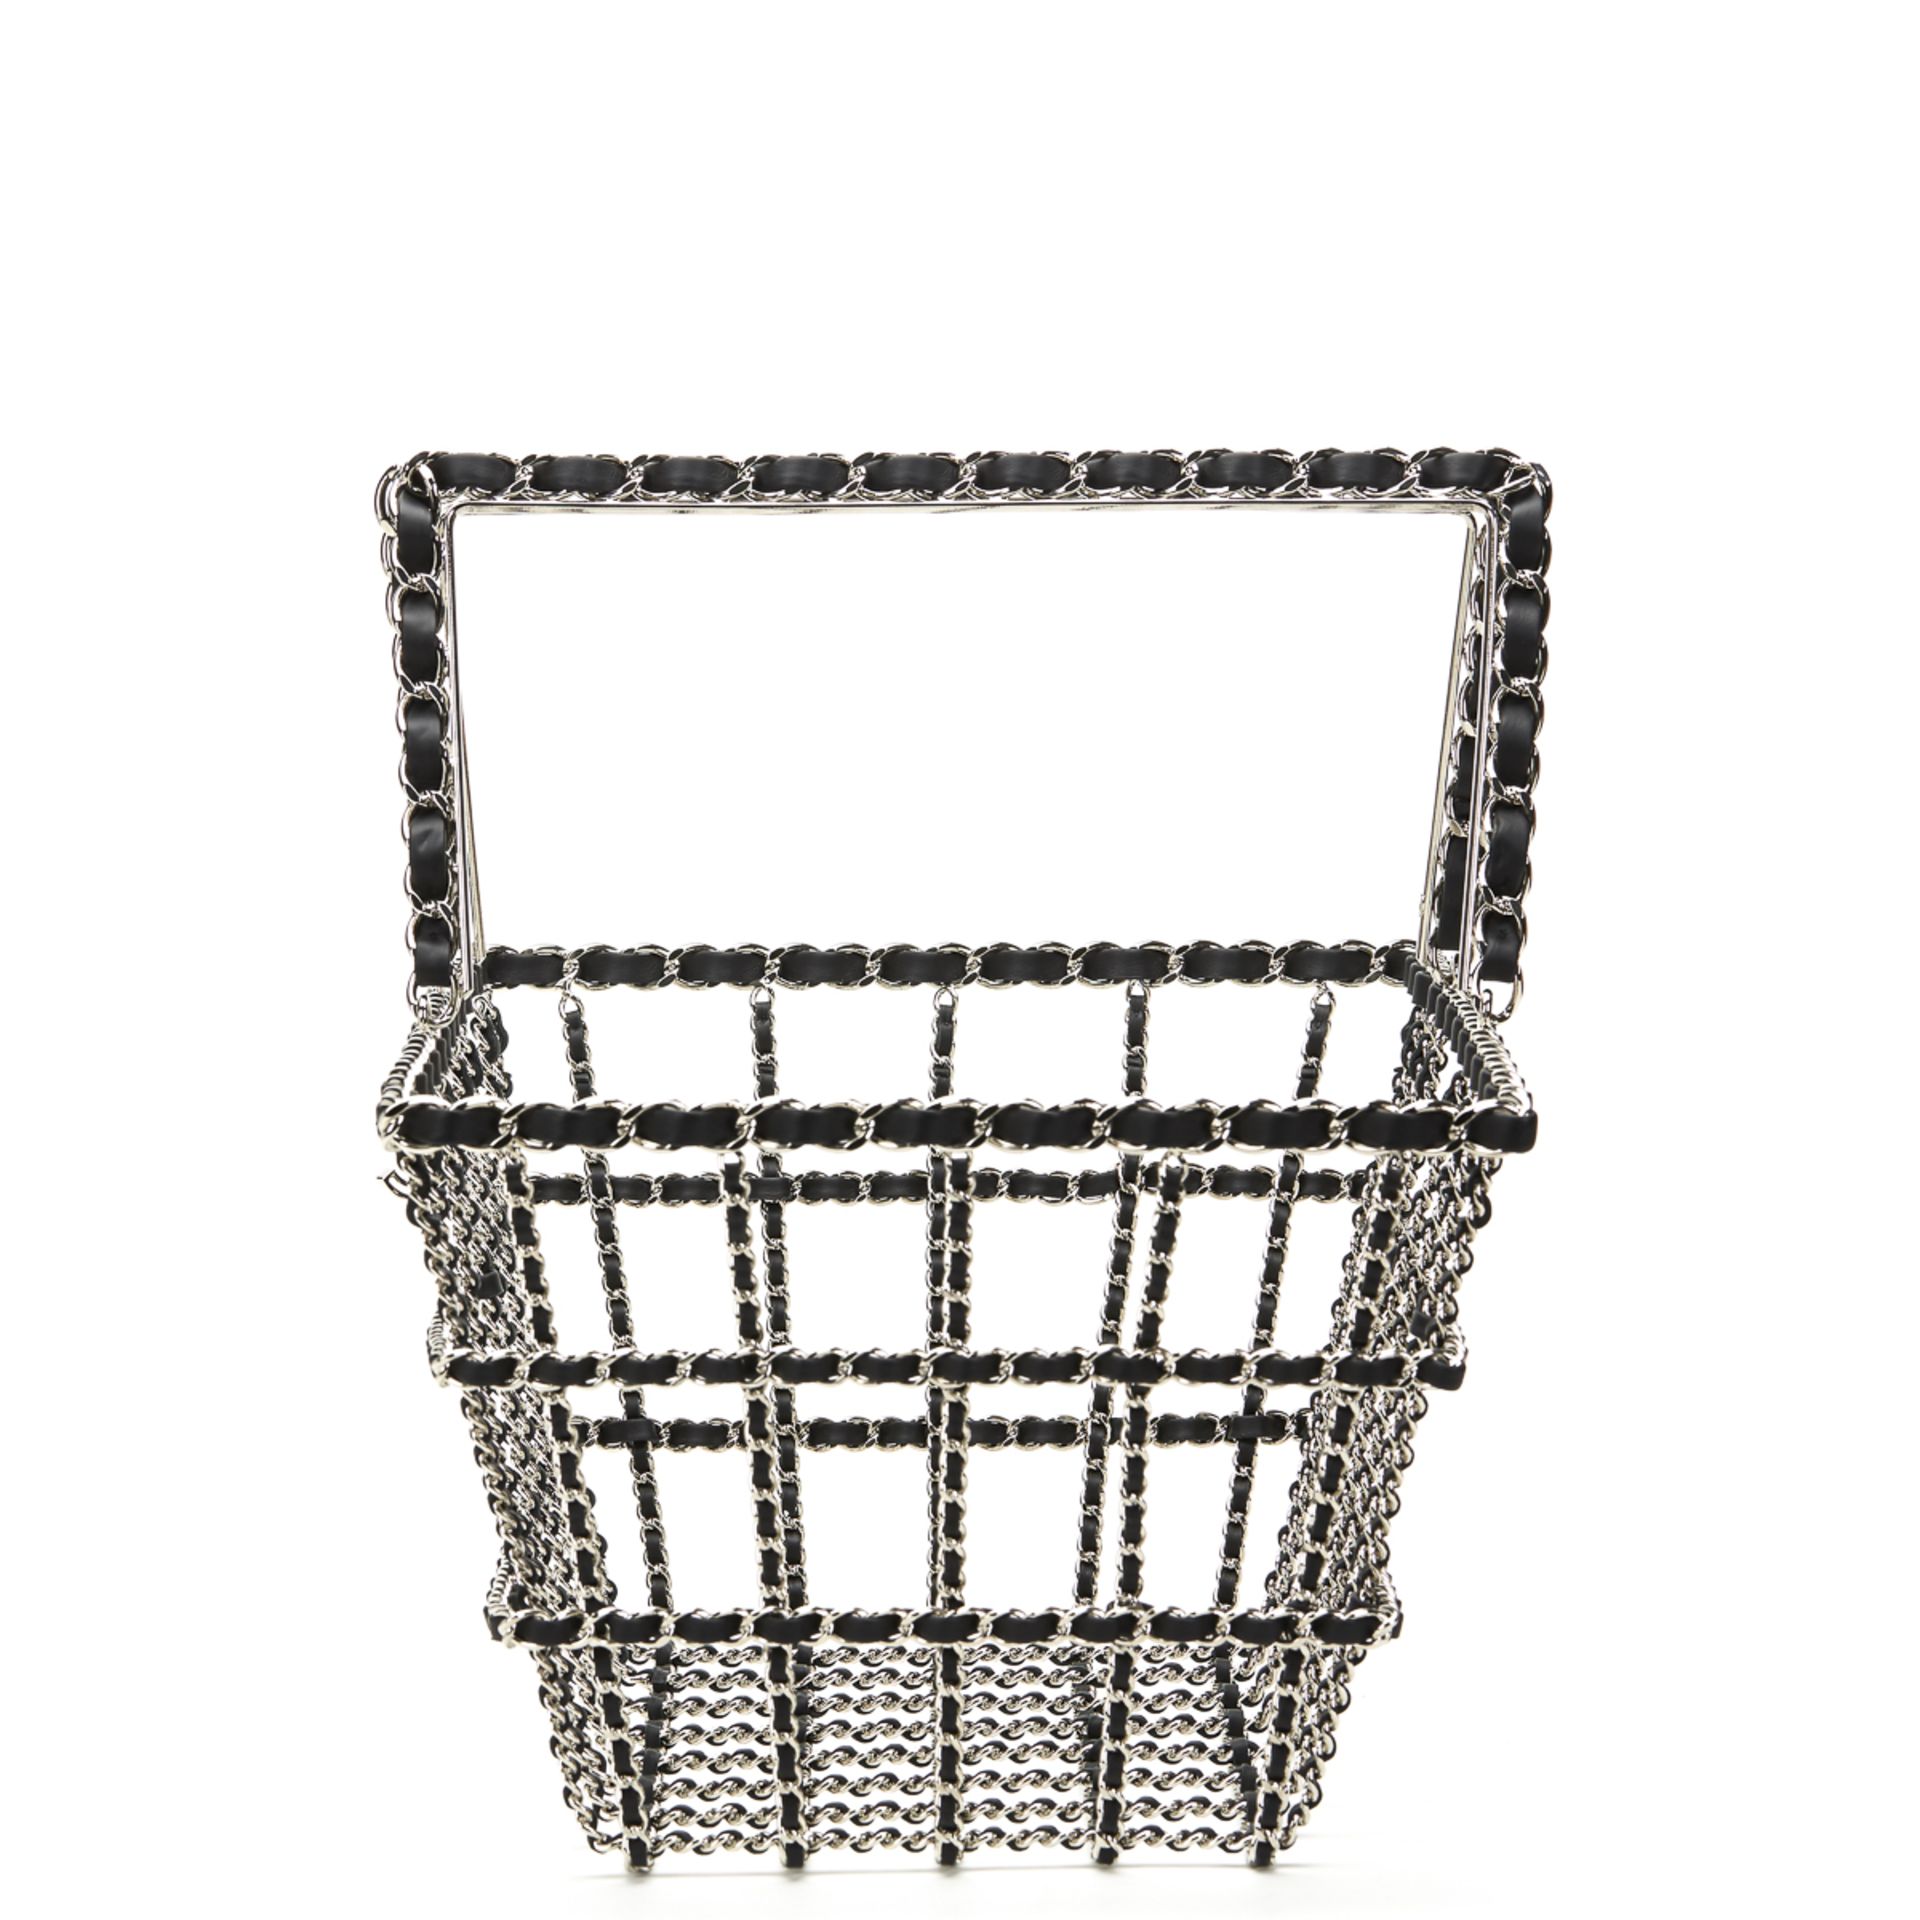 Silver & Black Calfskin Leather Fall 2014 Act 2 Basket Bag - Image 4 of 9